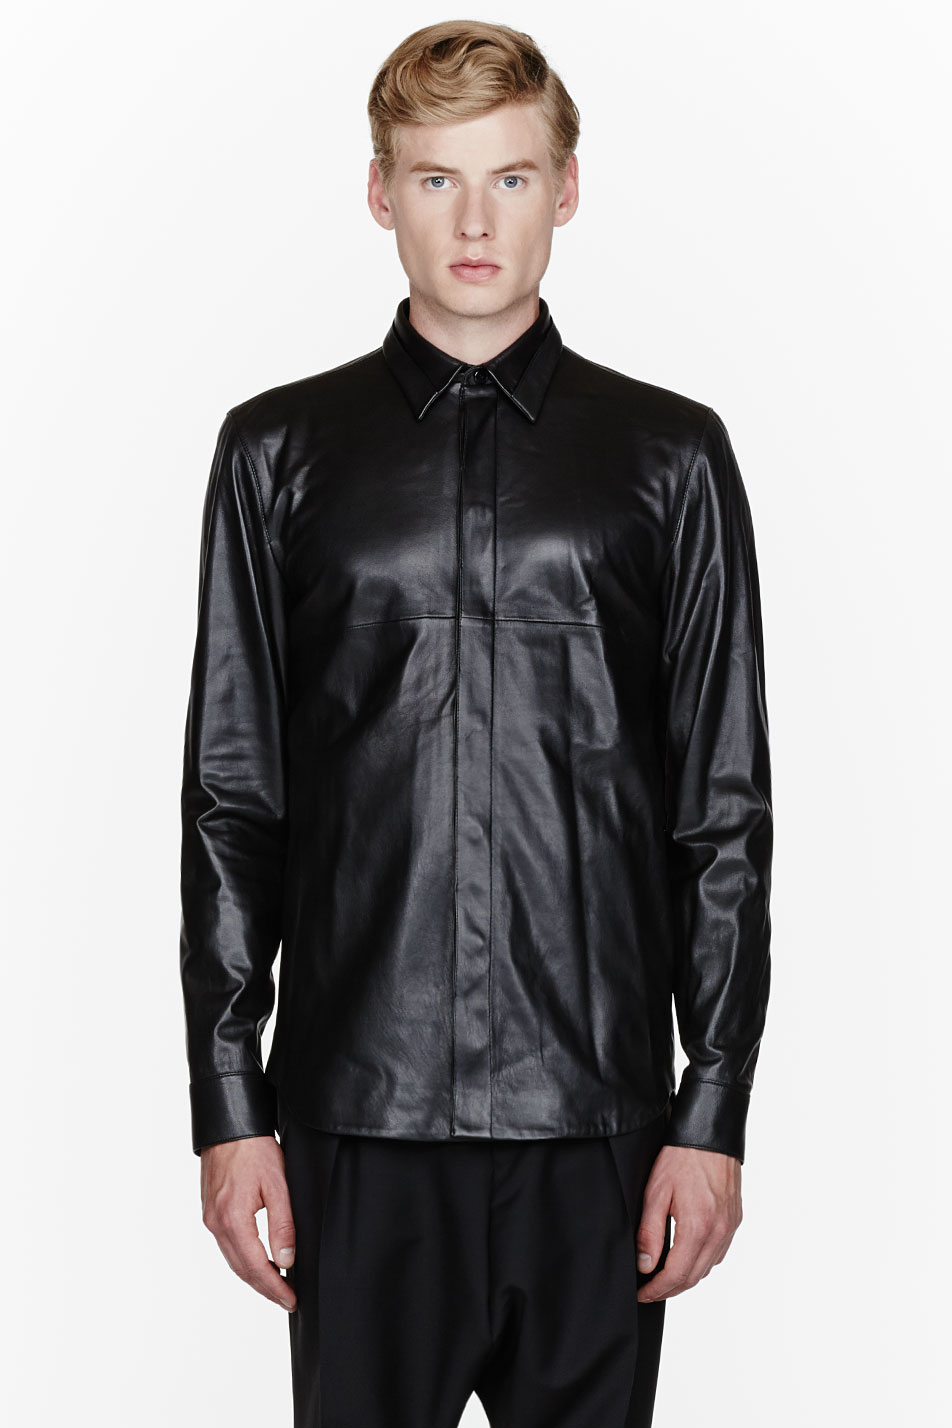 Lyst - Givenchy Black Leather Shirt in Black for Men